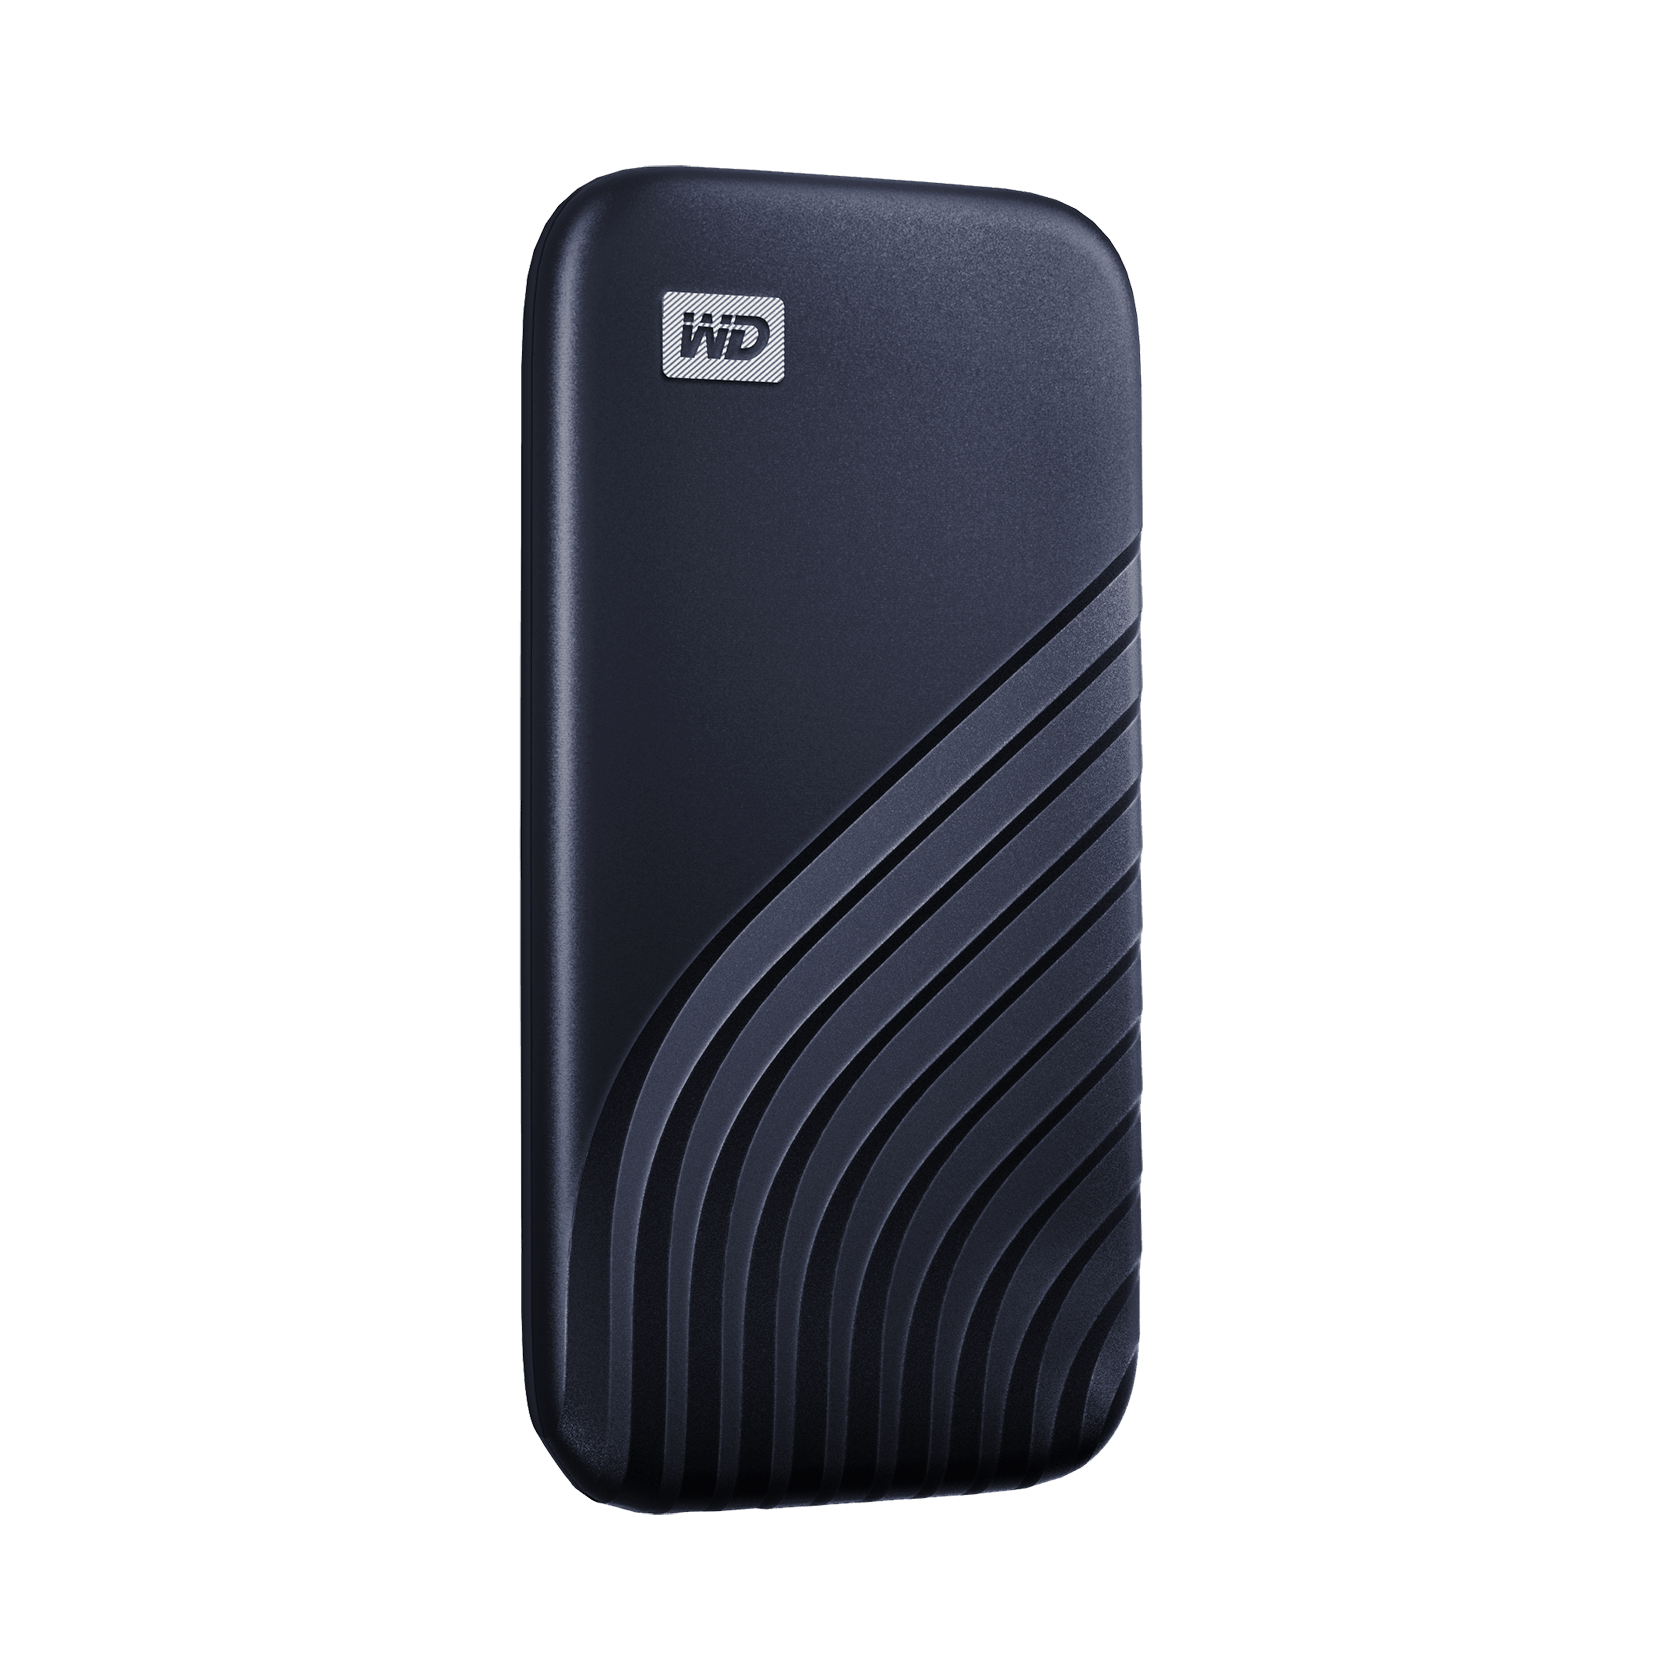 WD 1TB My Passport SSD, Portable External Solid State Drive, Blue - WDBAGF0010BBL-WESN - image 2 of 8